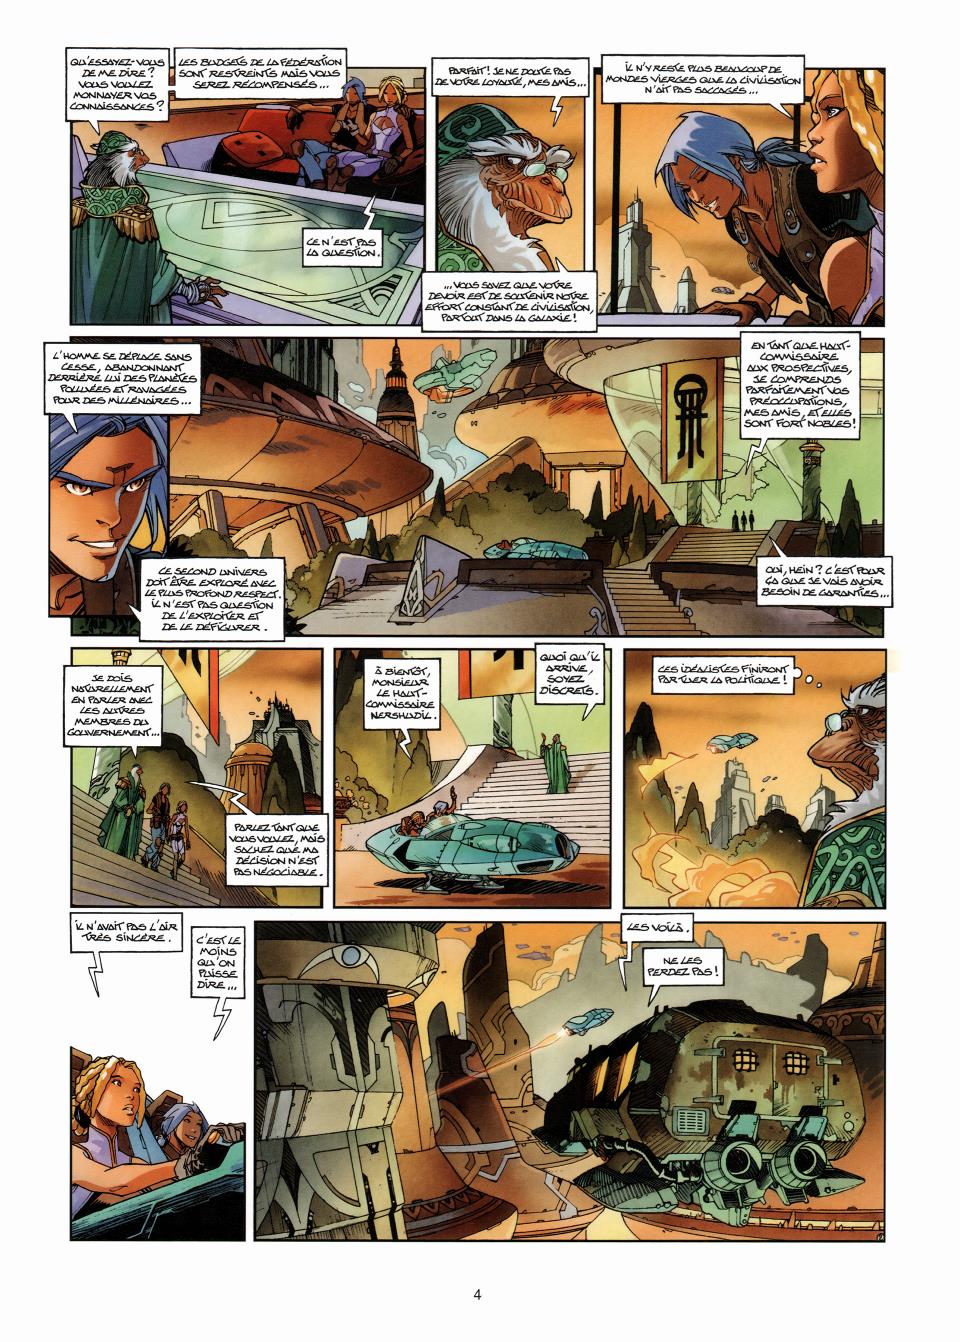 Les Naufrages dYthaq - Tome 10 - Nehorf-Capitol Transit numero d'image 4